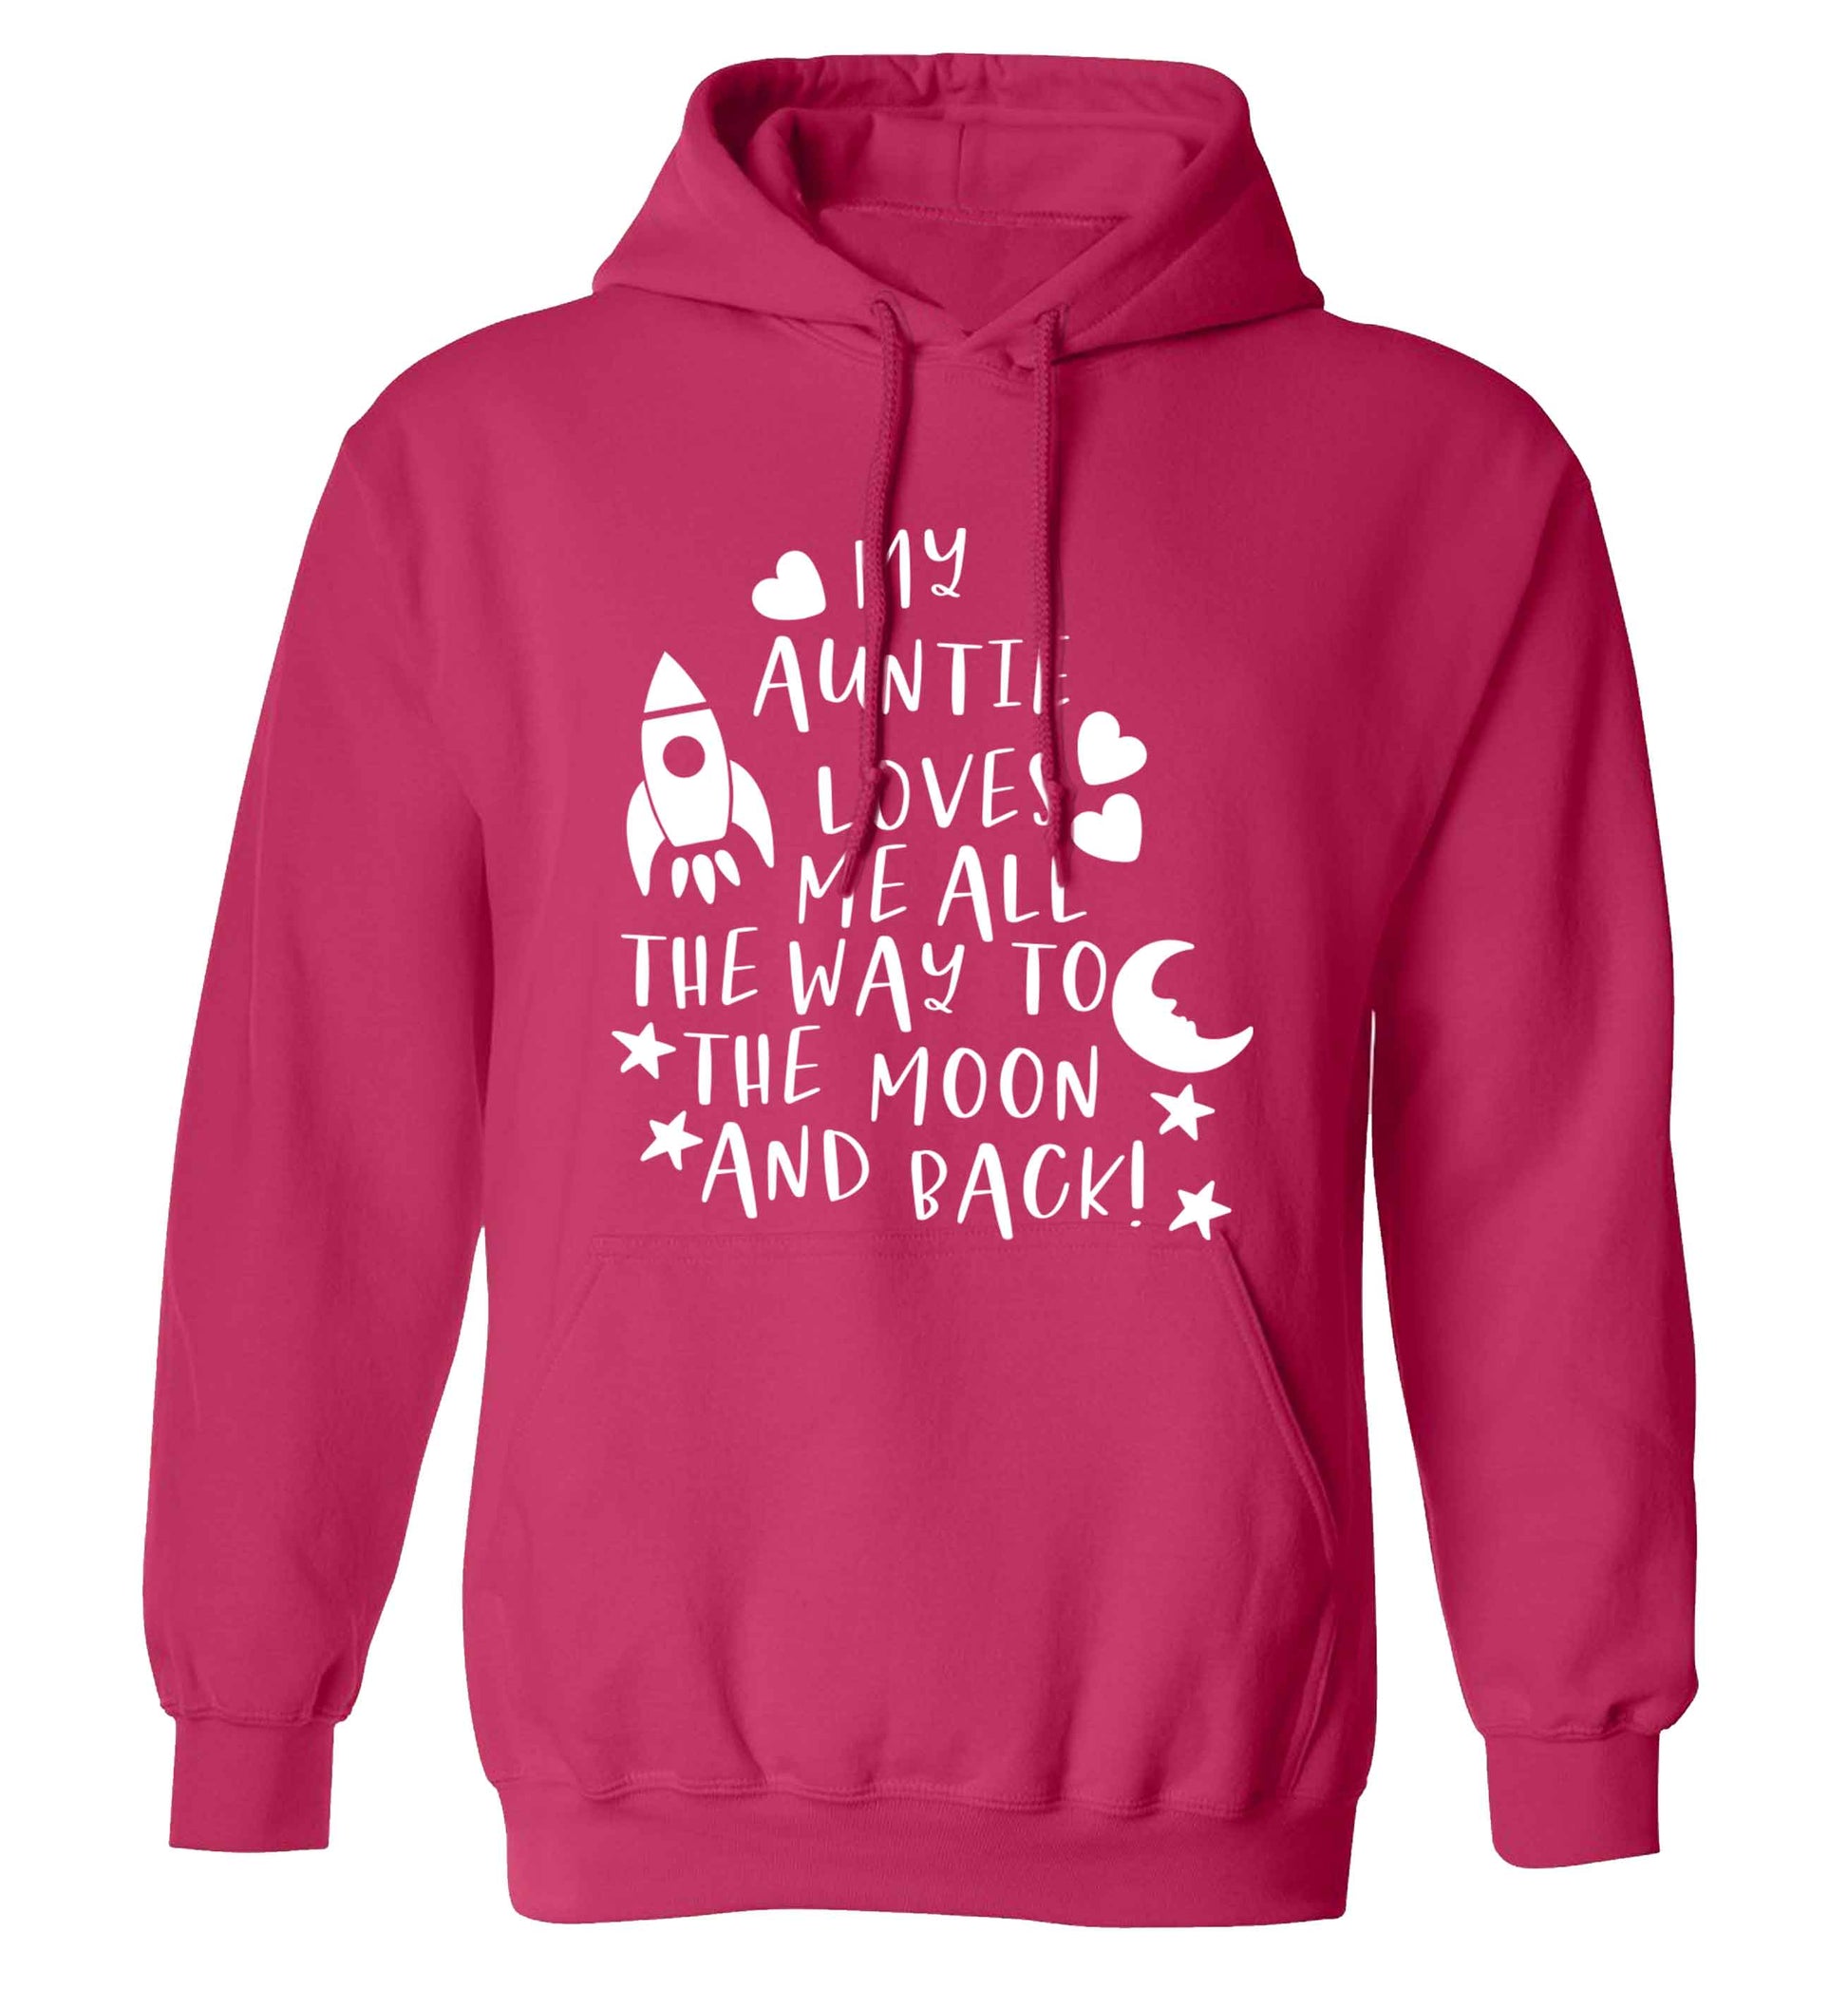 My auntie loves me all the way to the moon and back adults unisex pink hoodie 2XL